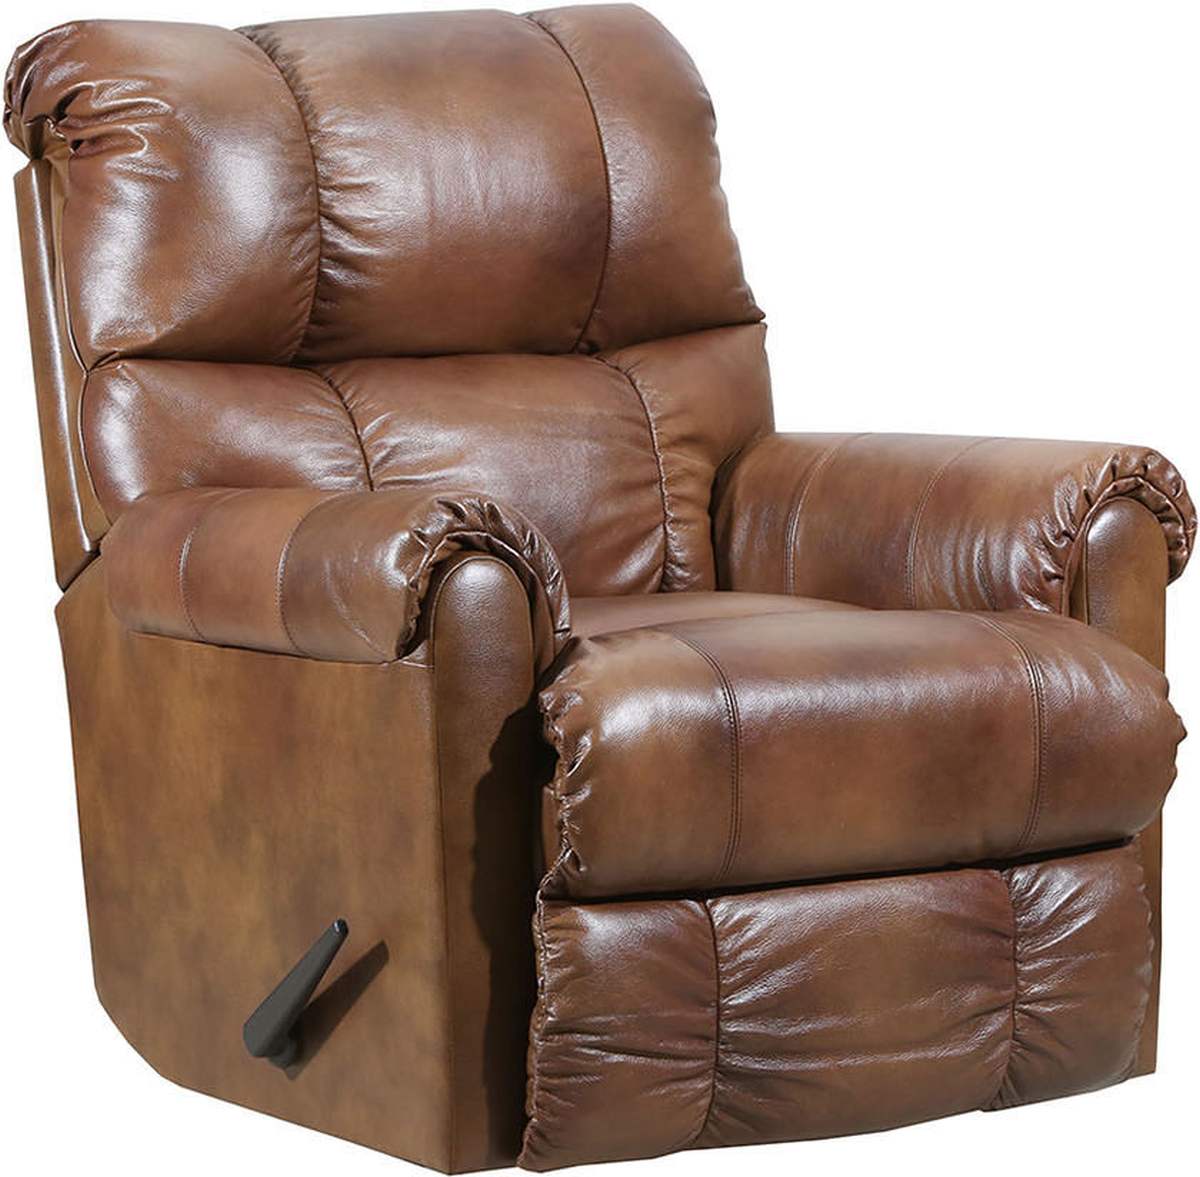 Lane® Home Furnishings  Avenger Soft Touch Chaps Leather Swivel Glider Recliner